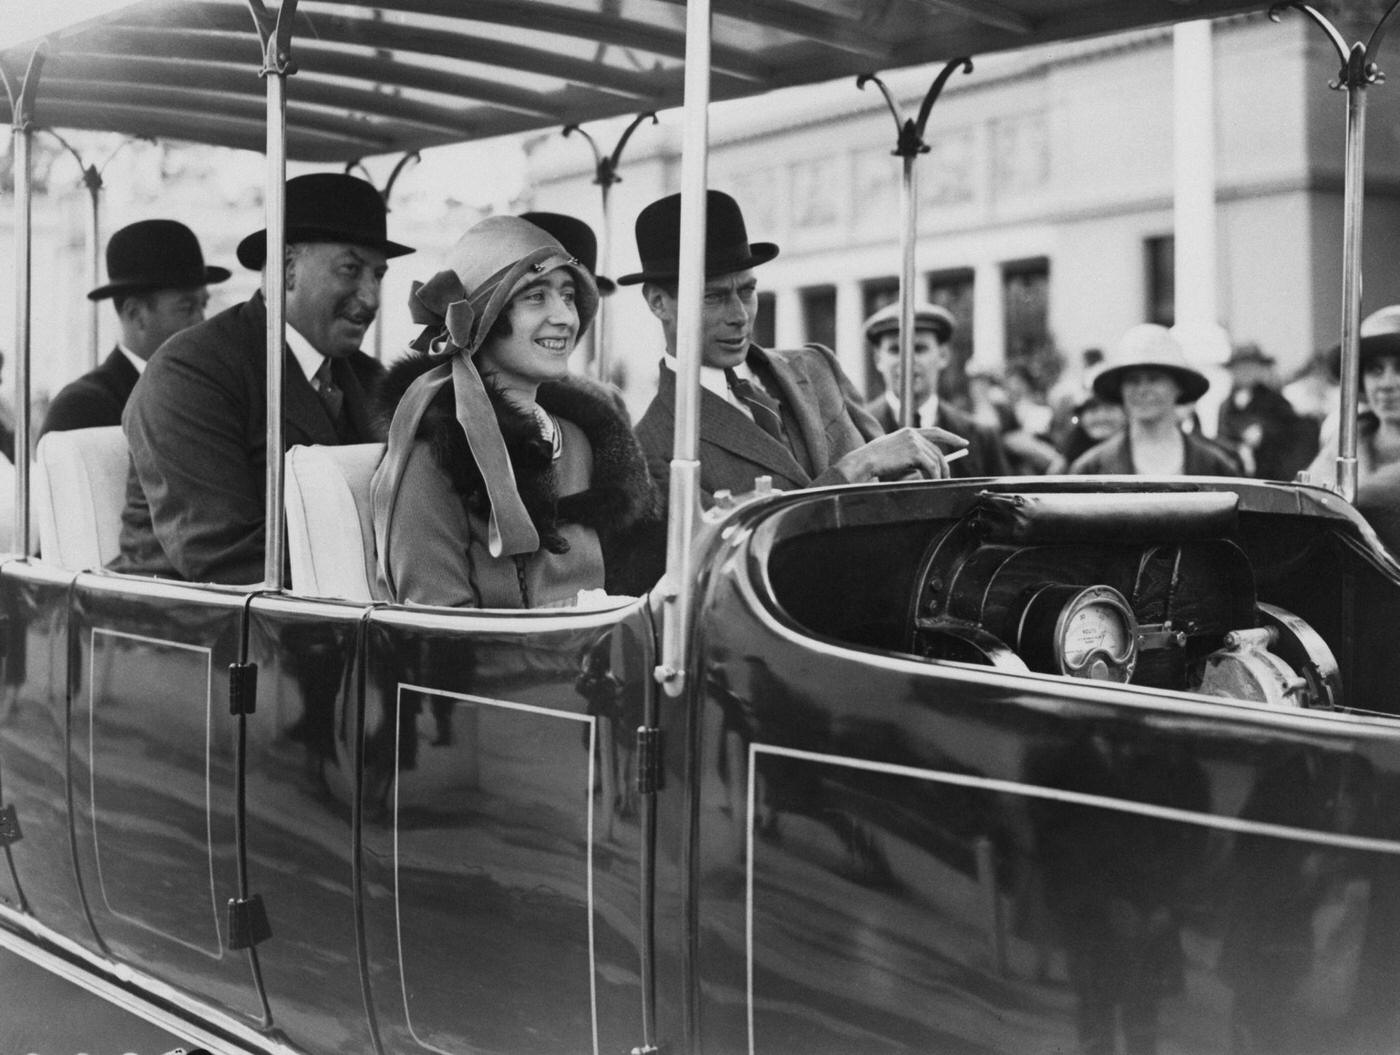 The Duke and Duchess of York take a ride on a 'Railodok' electric car at the British Empire Exhibition, Wembley, London, 29th May 1925.